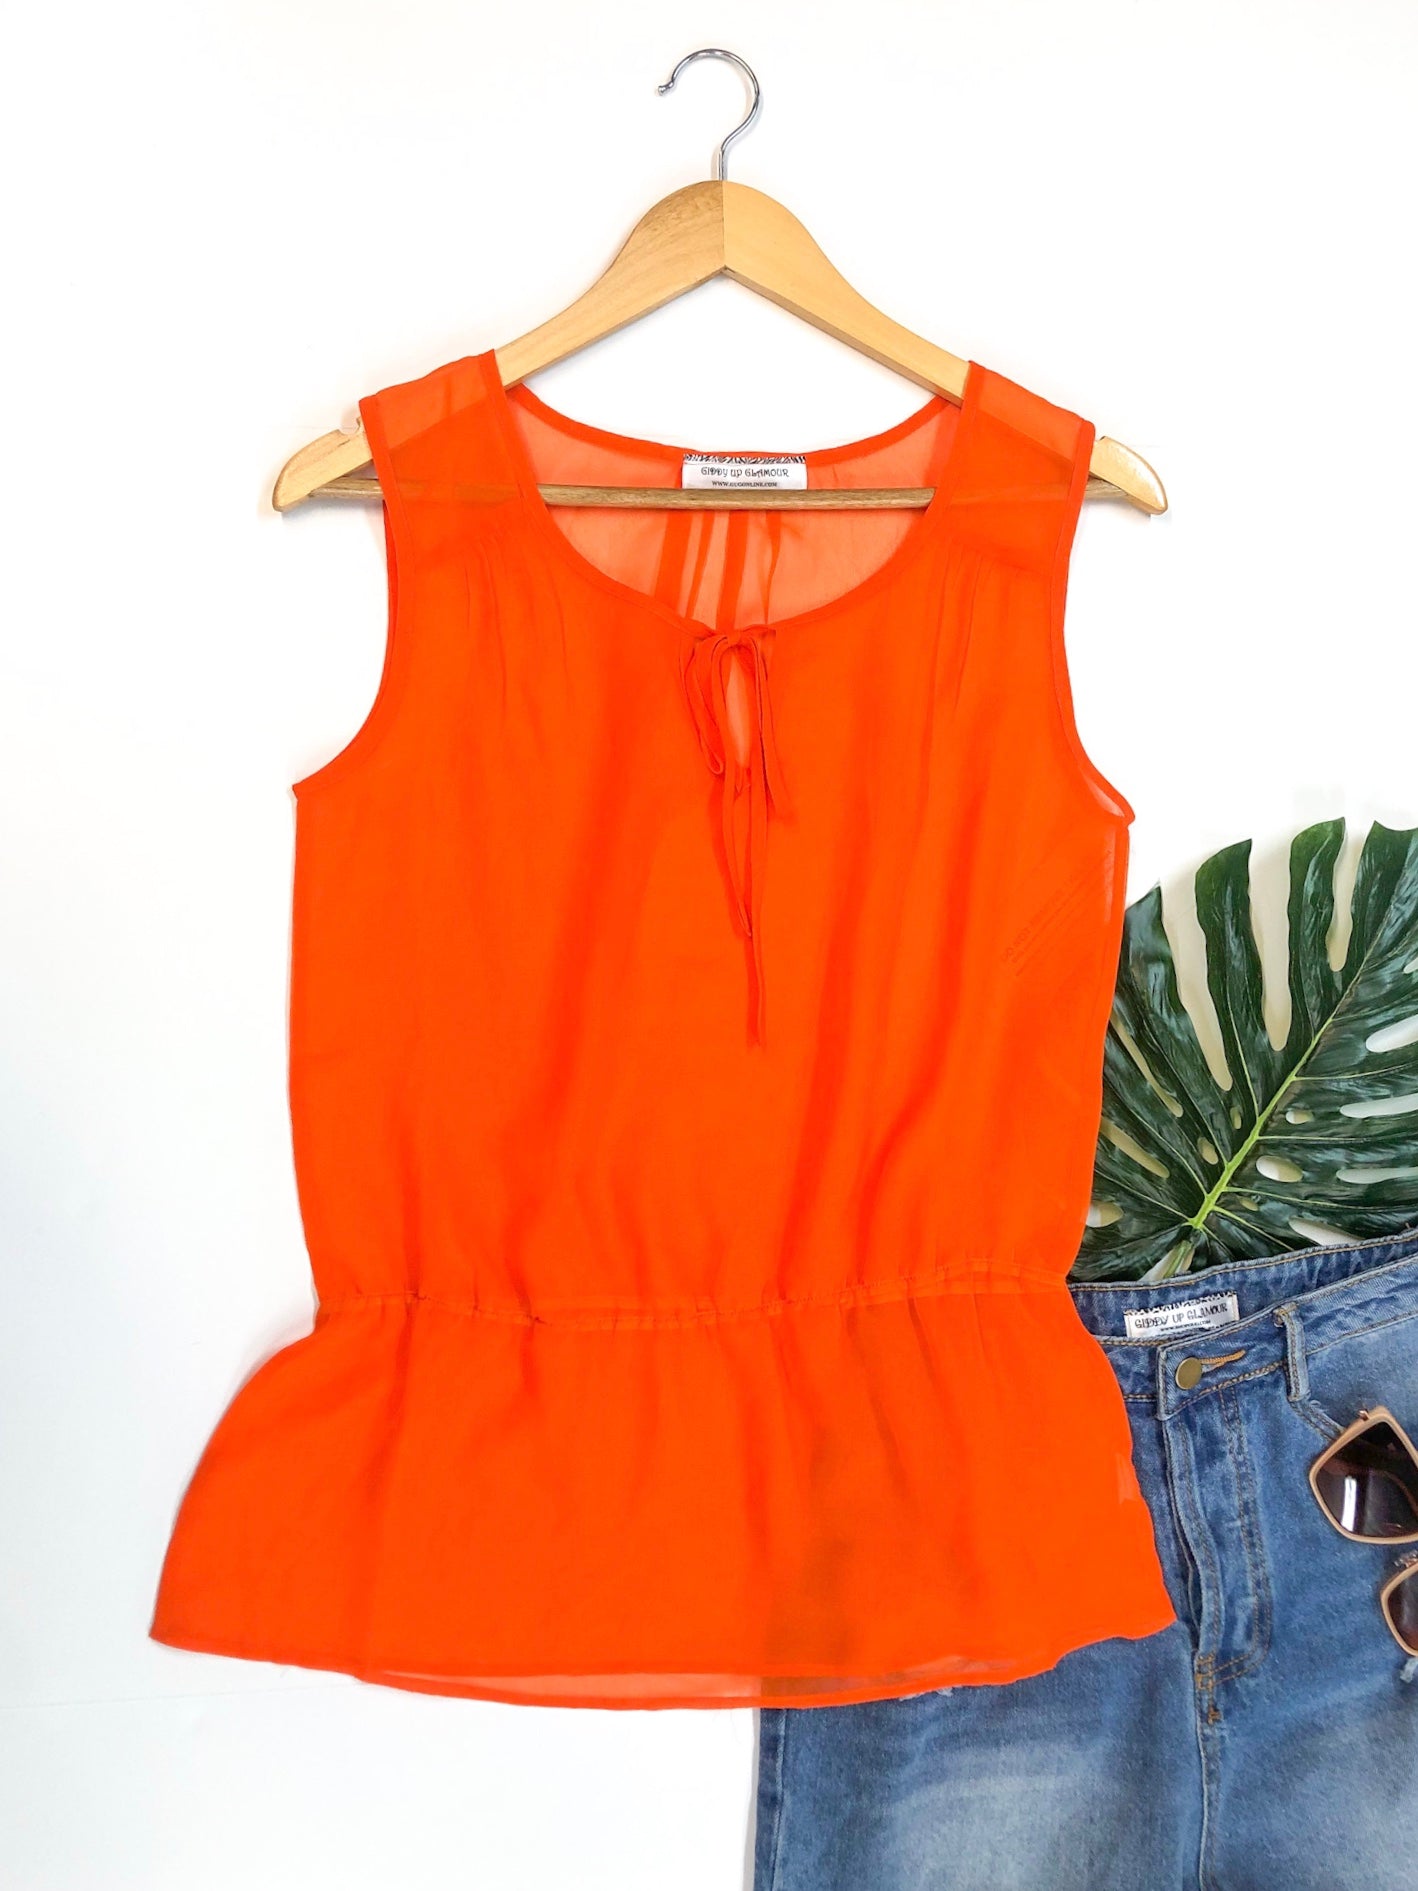 Last Chance Size Large | Sheer Peplum Tank Top with Keyhole Tie in Orange - Giddy Up Glamour Boutique